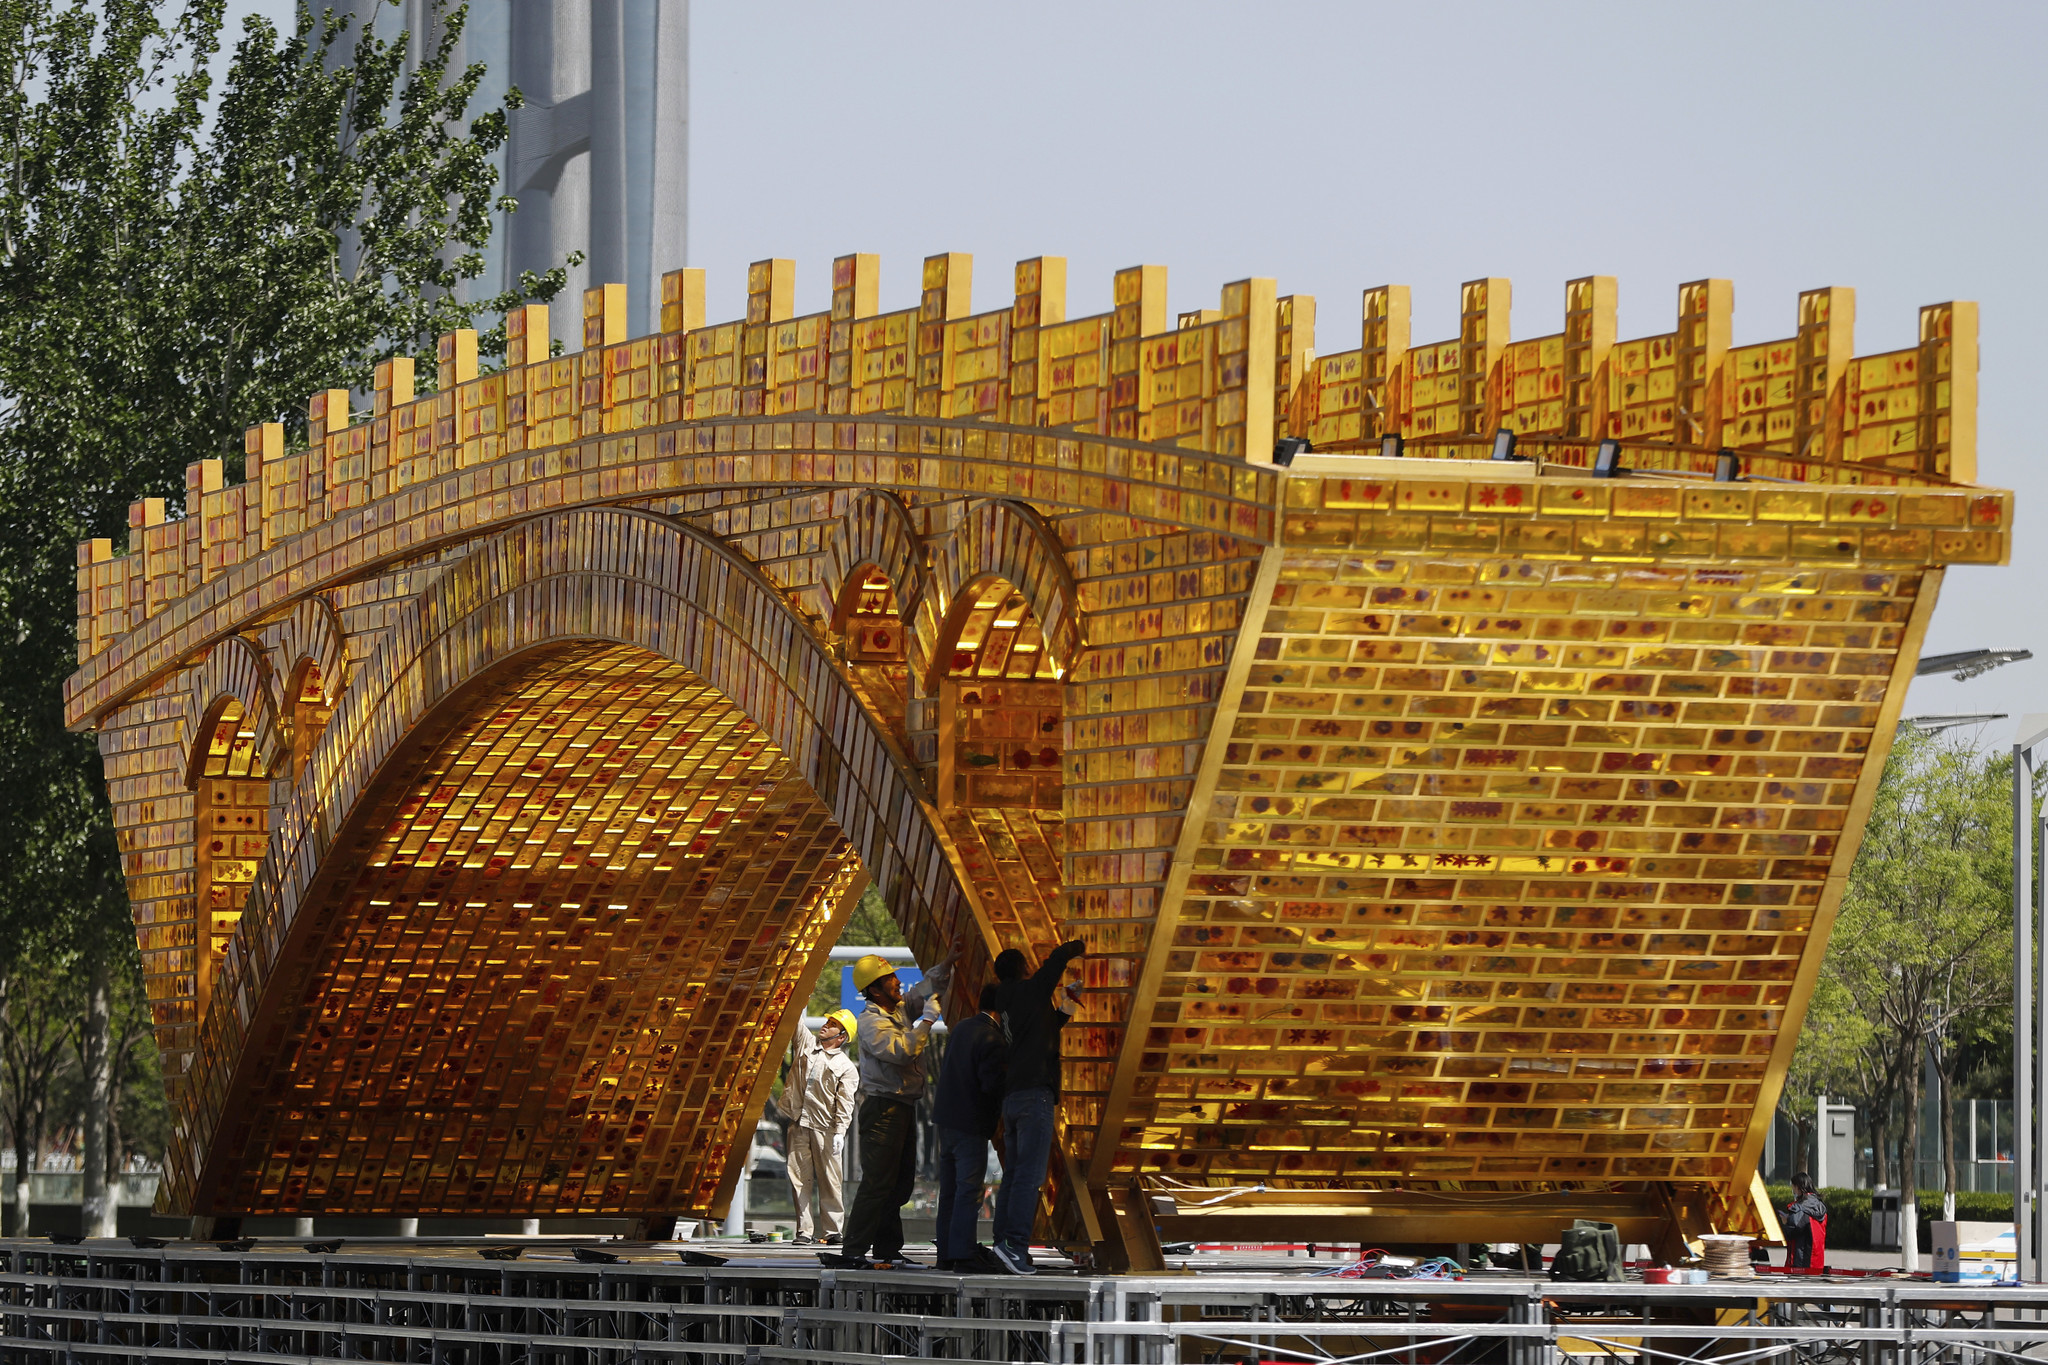 Workers last month install wires on the "Golden Bridge of Silk Road" structure outside the National Convention Center in Beijing. (Andy Wong / Associated Press)